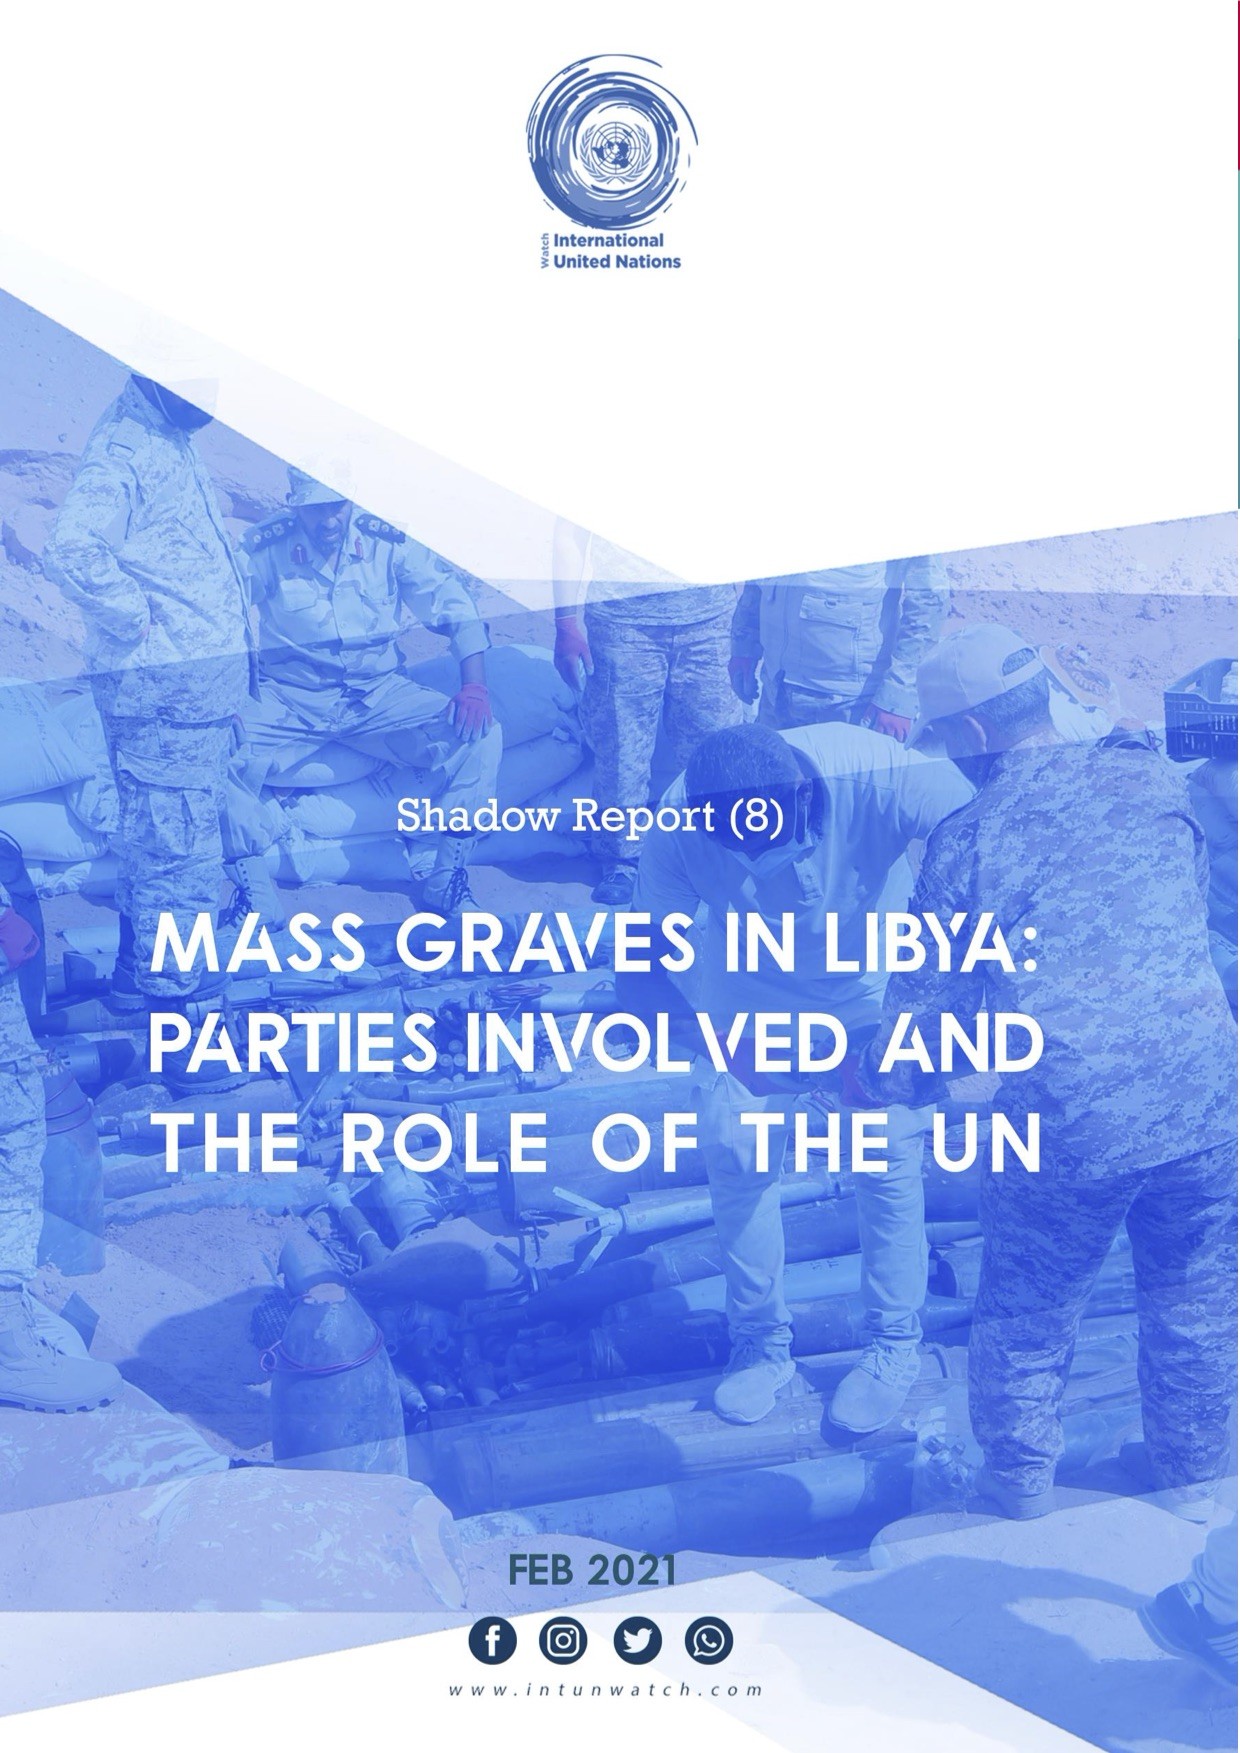  Report (8): Mass Graves in Libya: Parties Involved and the Role of the UN